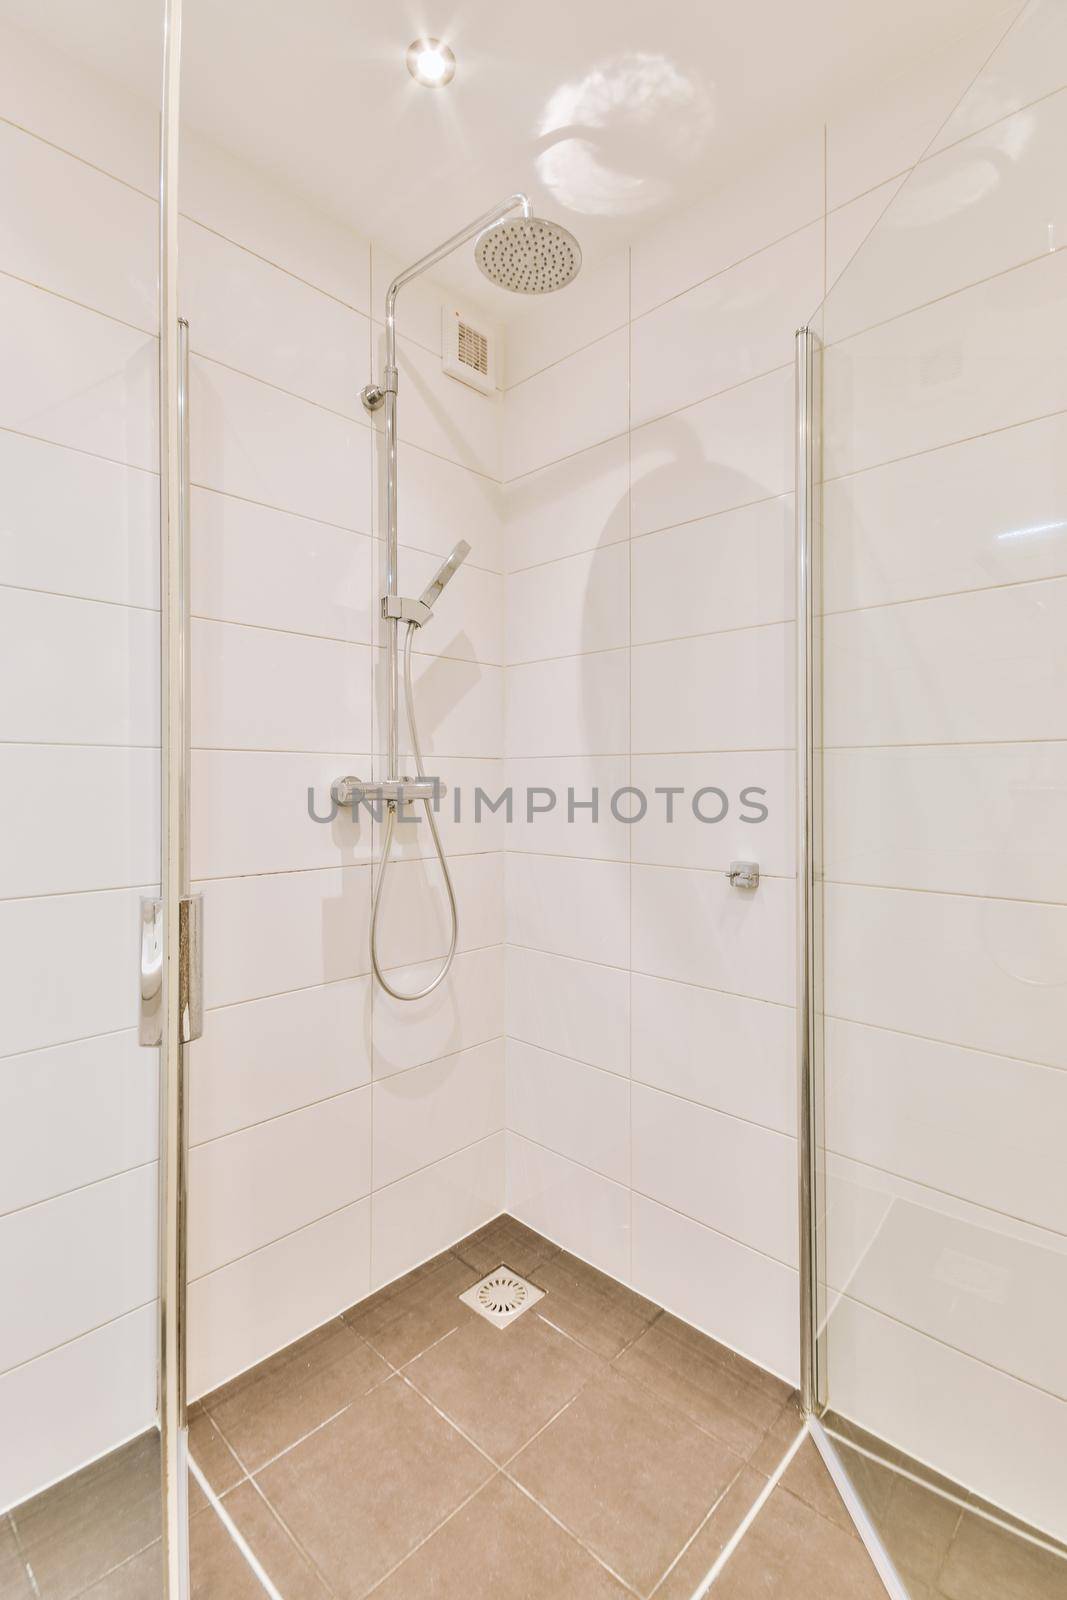 Interior of the shower cabinet with by casamedia